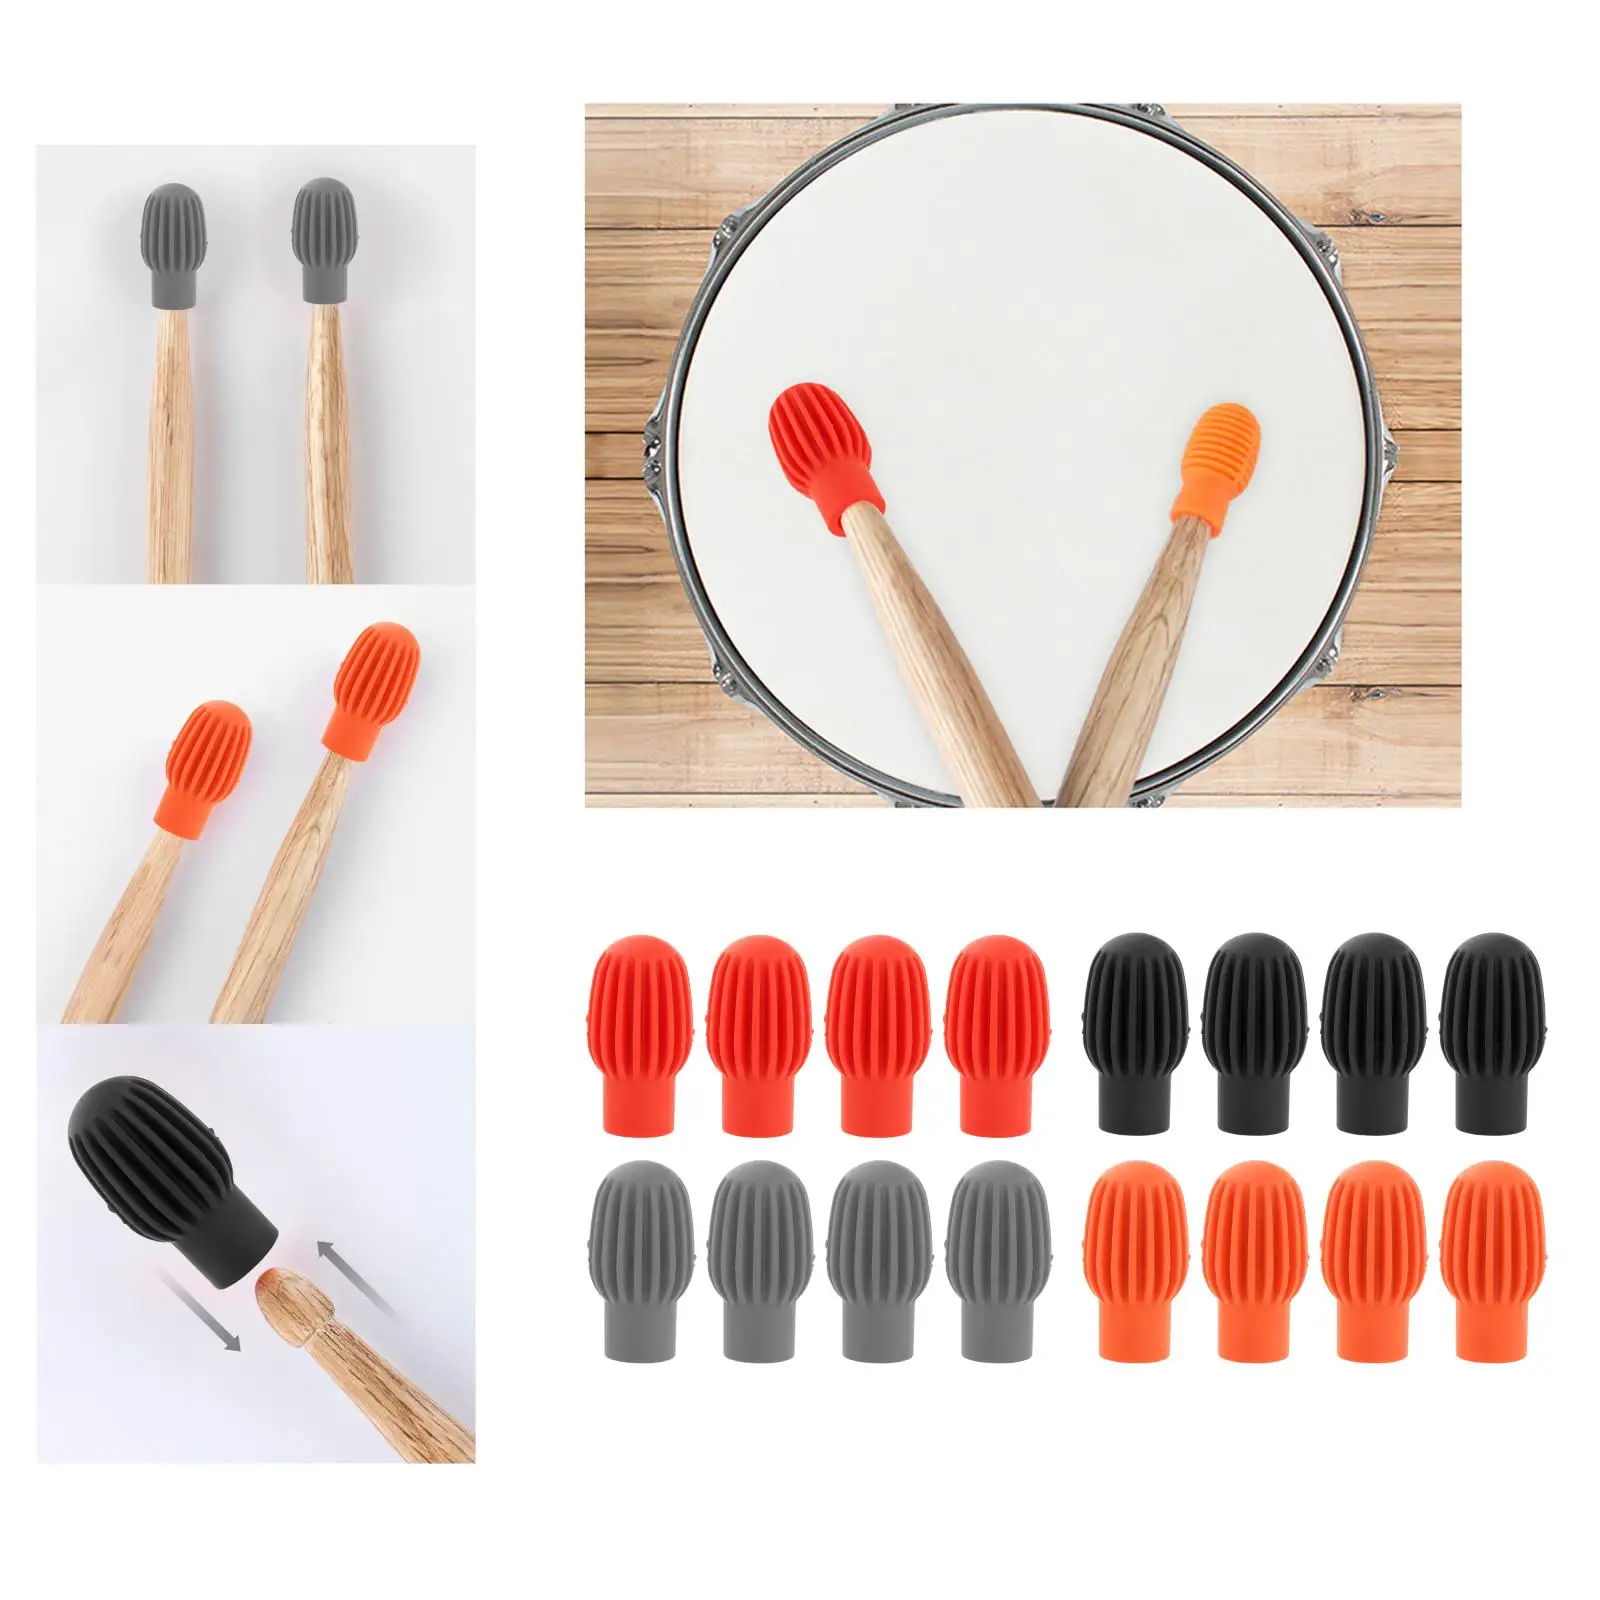 4 PCS Drum Mute Drum Dampener Silicone Silent Drumstick Practice Tips Mute Drumstick Tip Percussion Accessory